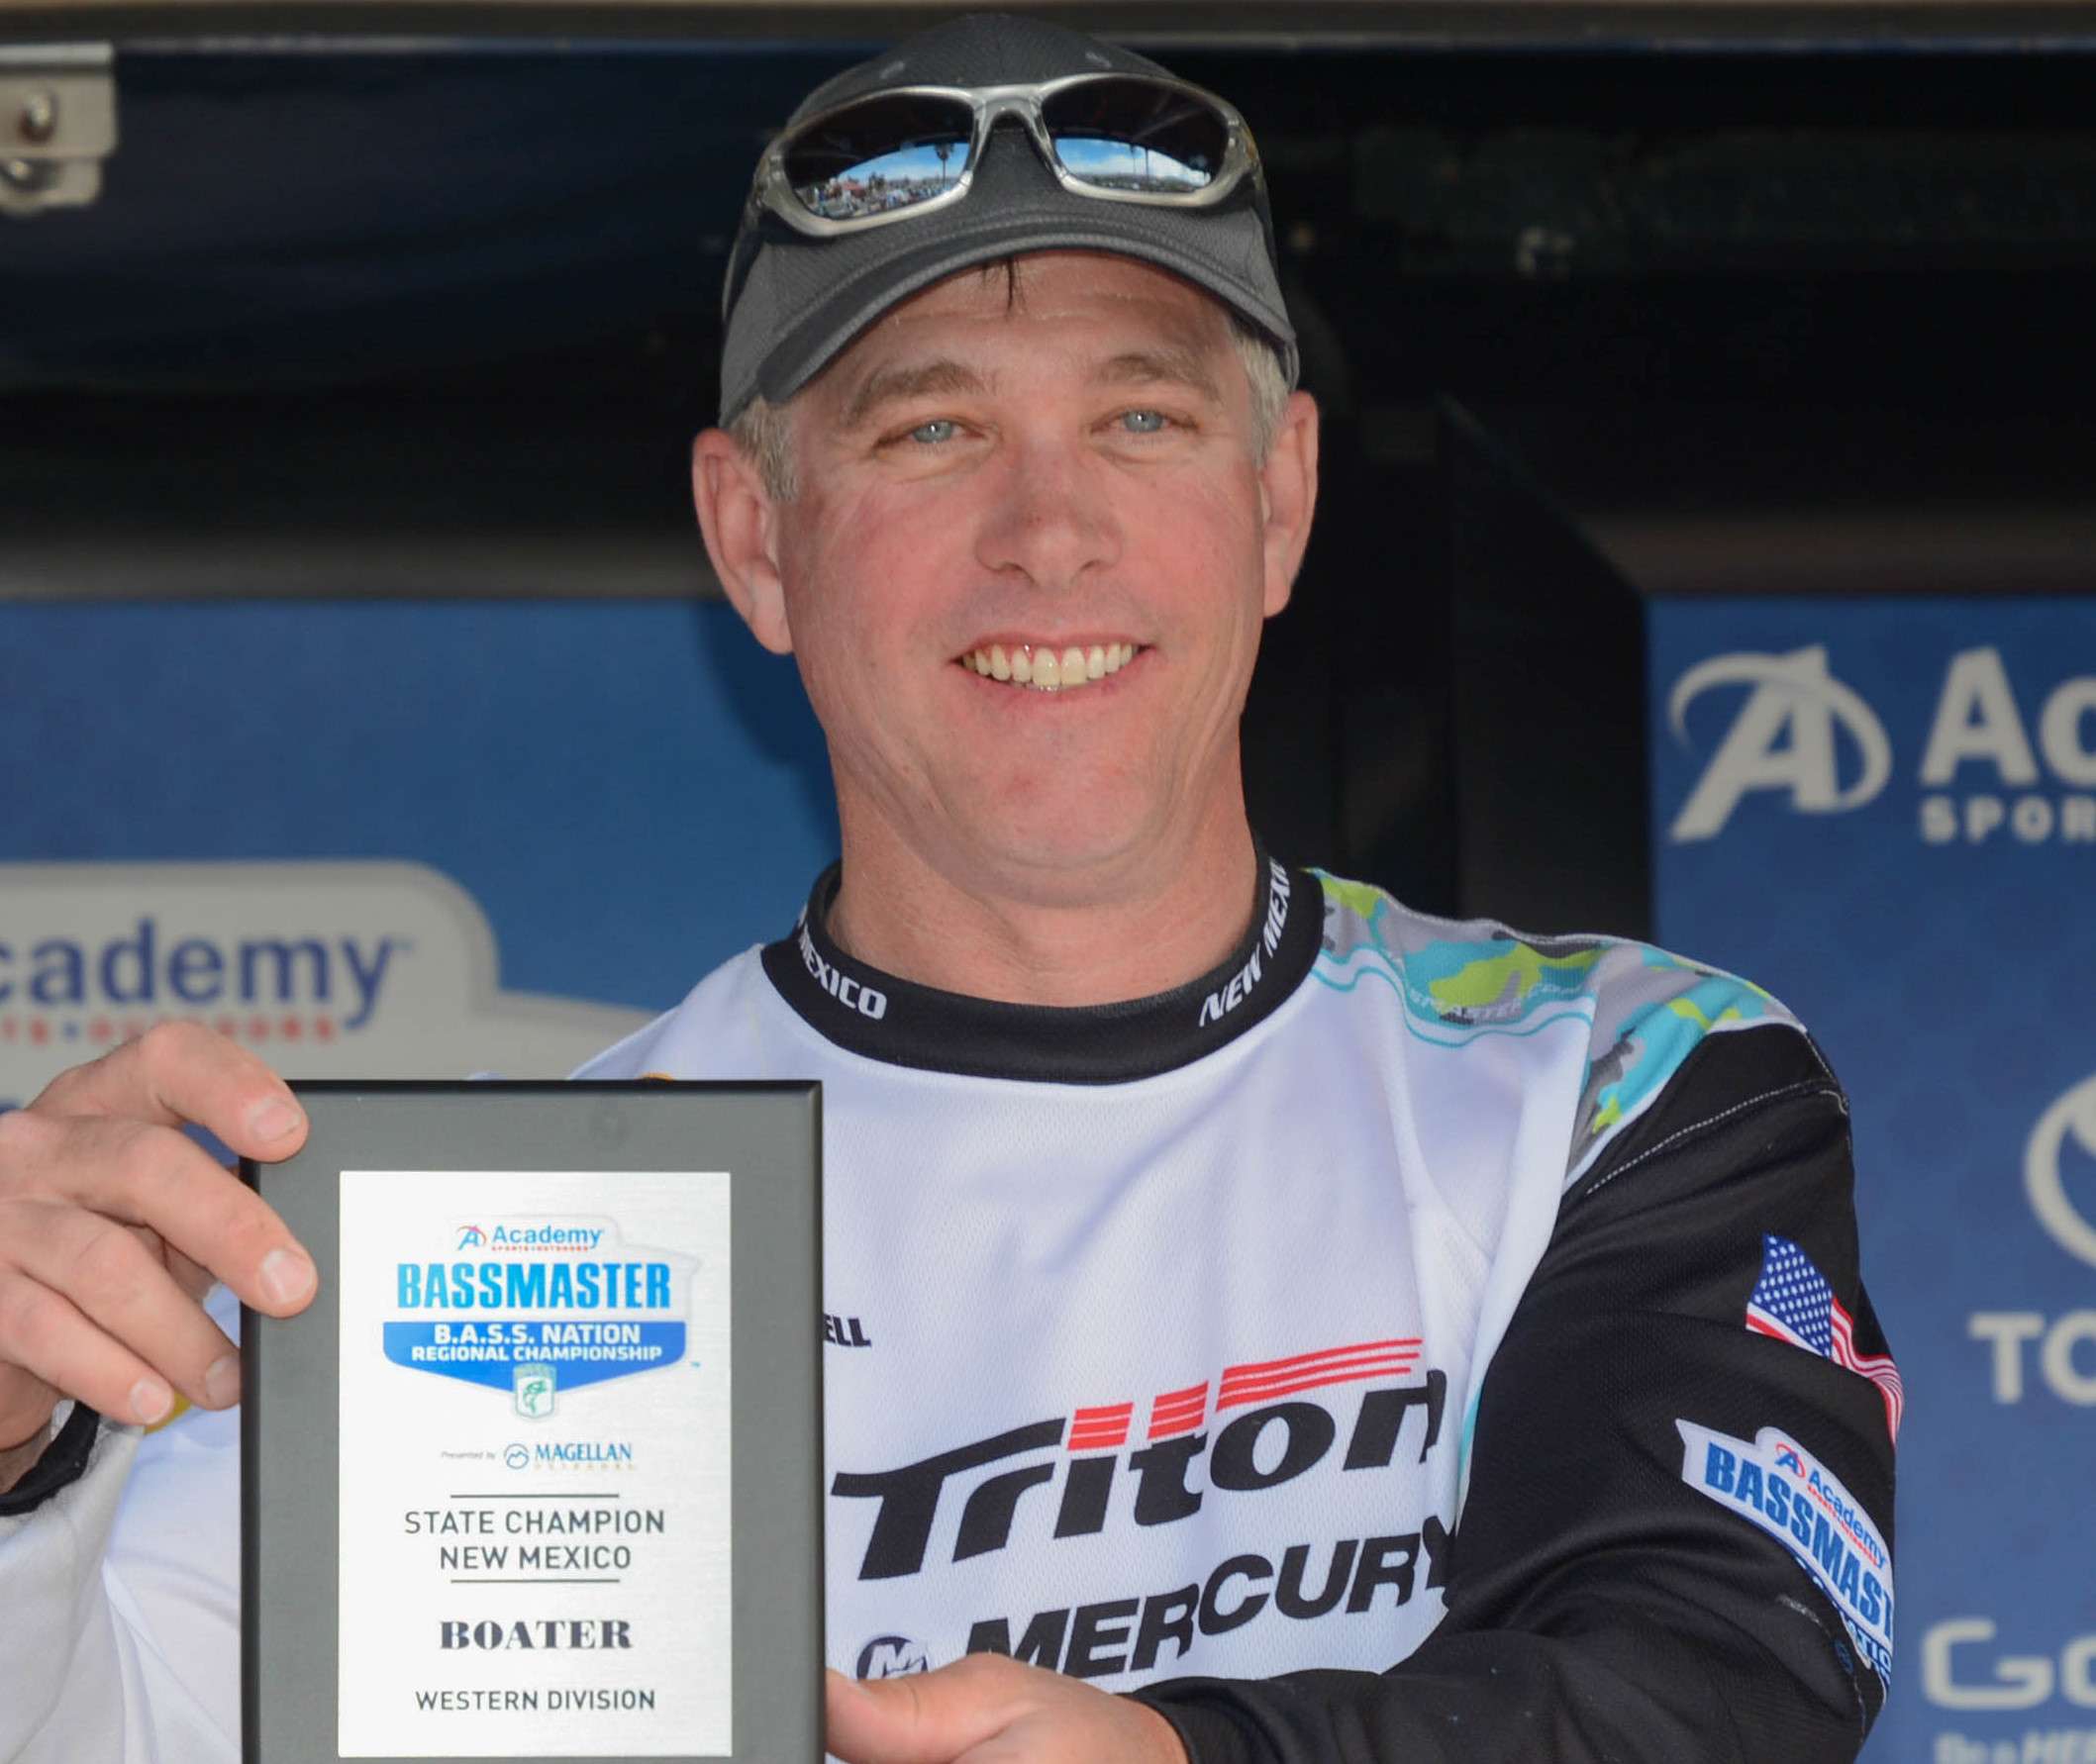 Randy Campbell <br>
New Mexico Boater <br>
Randy Campbell, a member of the Socorro Bass Club, is a real estate broker in New Mexico. He likes snow skiing and golfing. Campbellâs sponsors are Denali Rods, Mofish Baits and ME Development Inc. This will be Campbellâs first championship. 